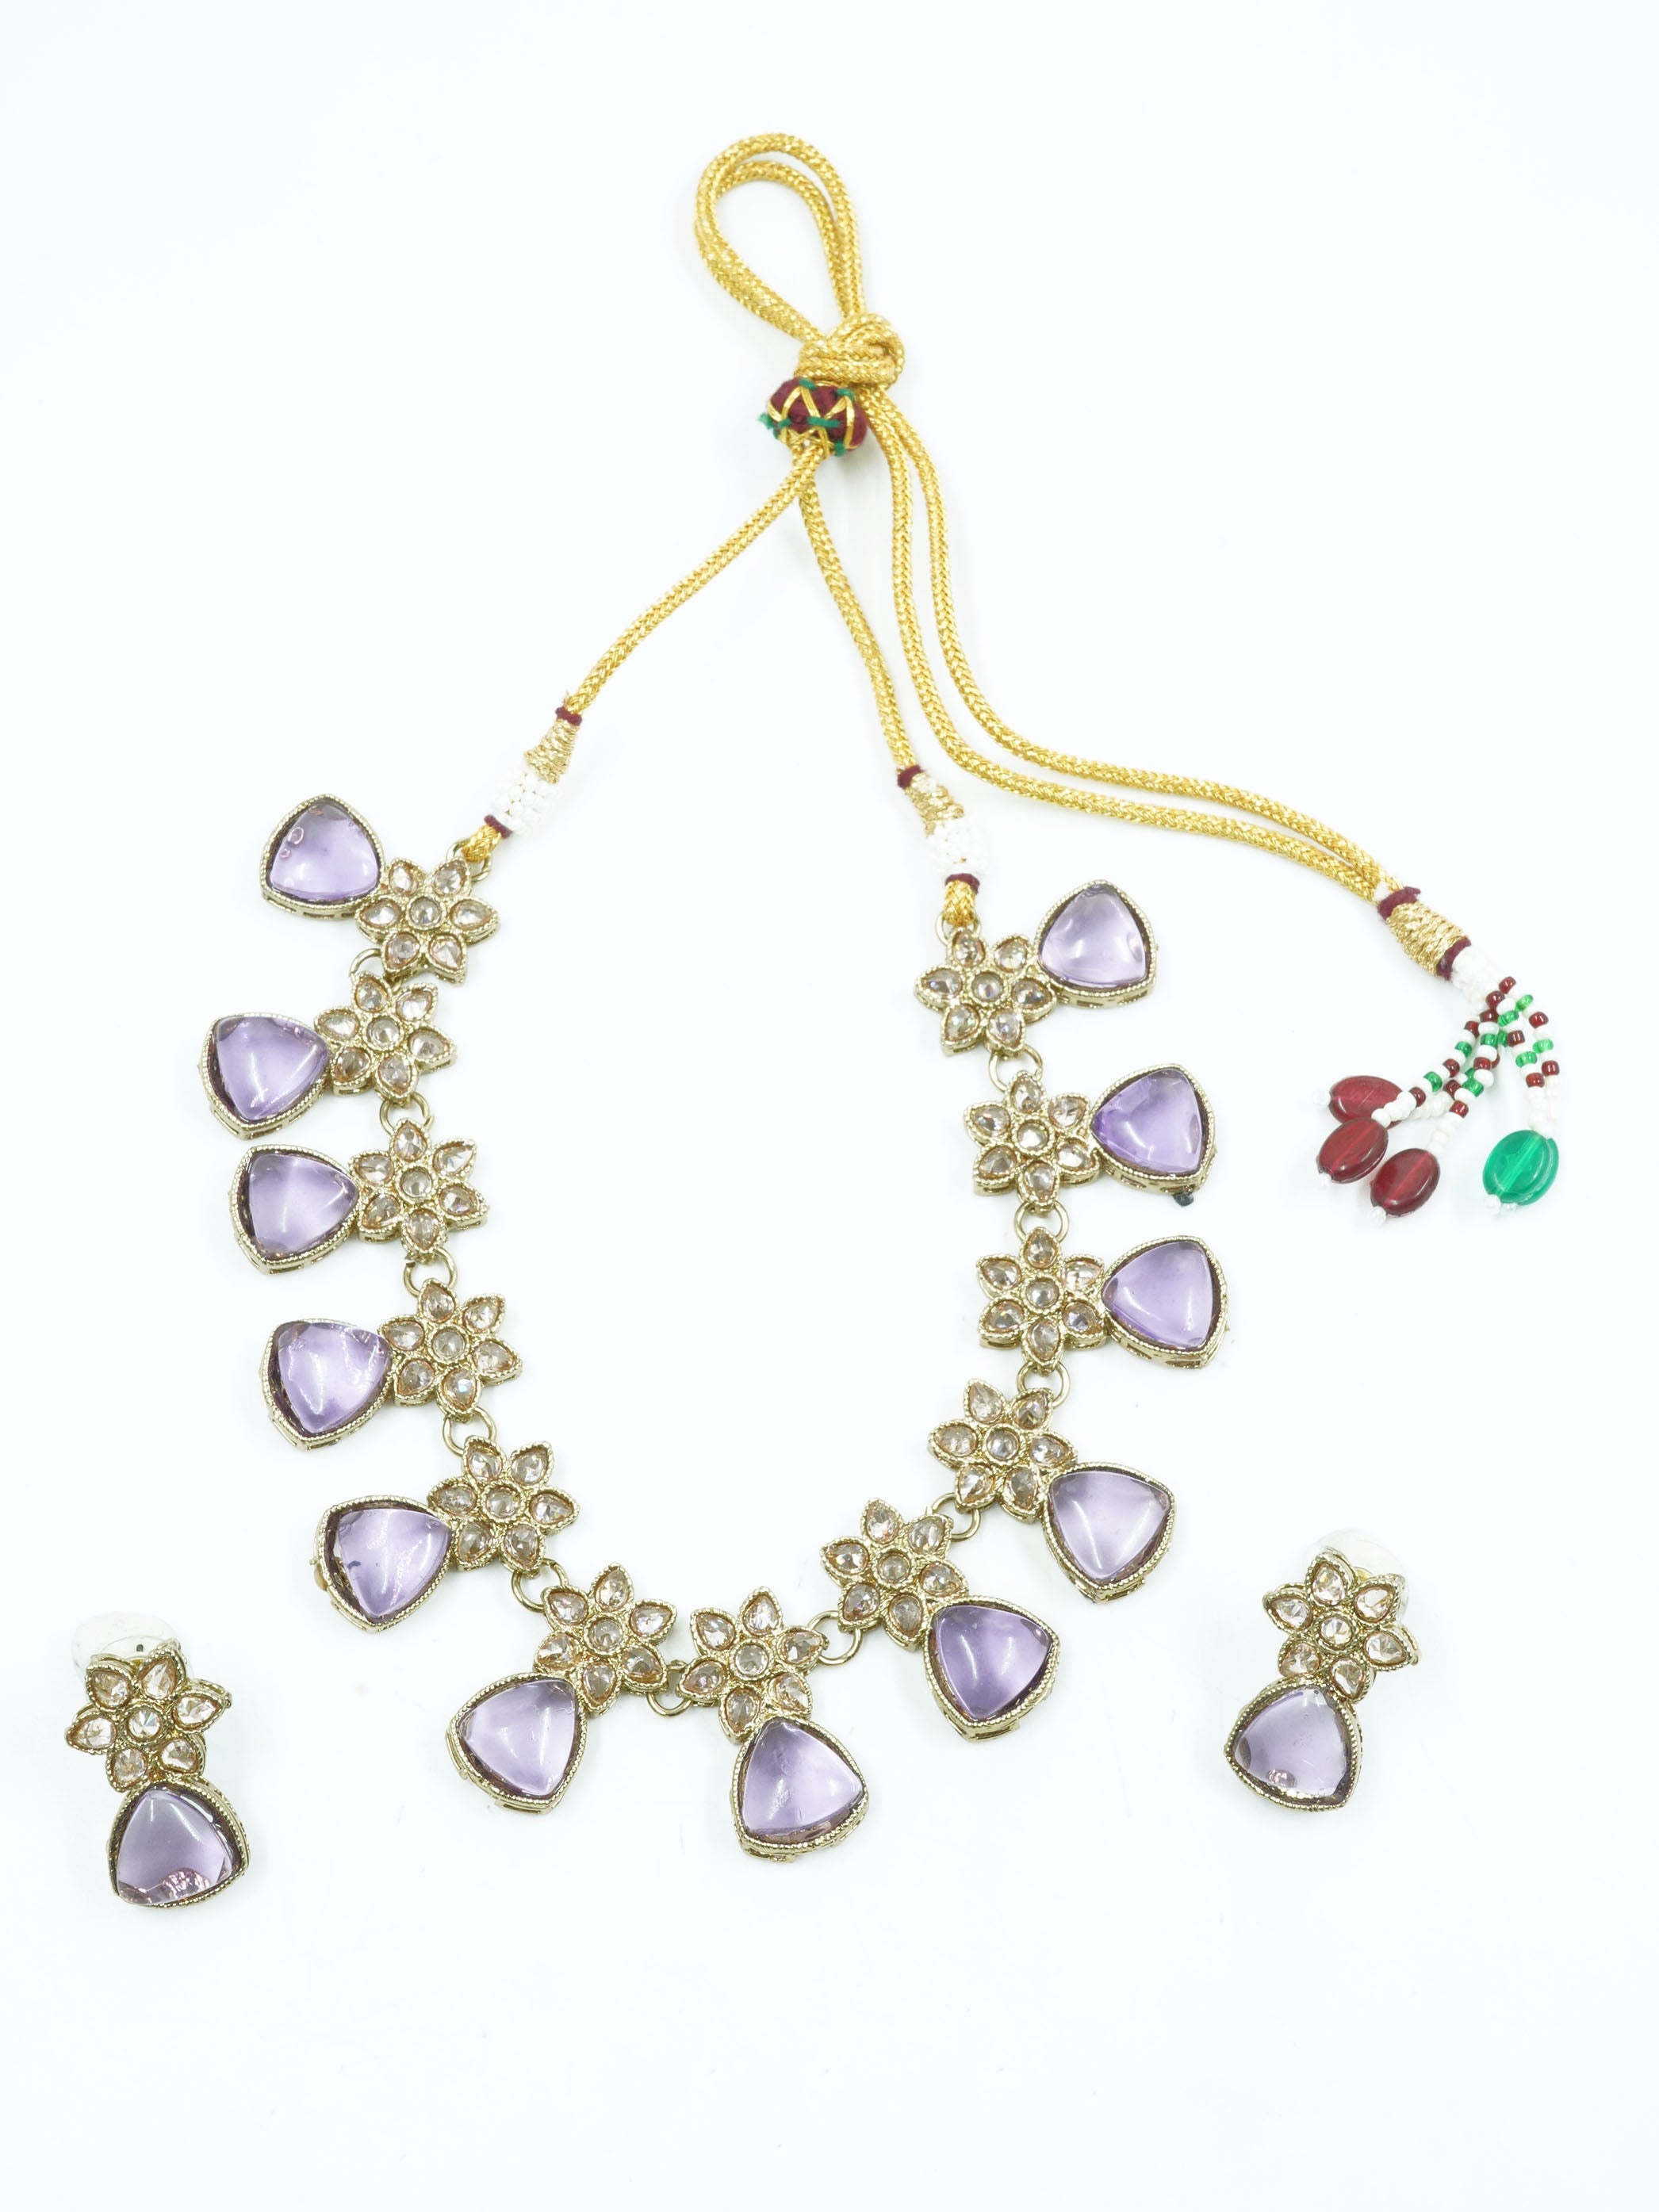 Premium Gold Plated Pastel Necklace Set with Mona Lisa Stones 11978N